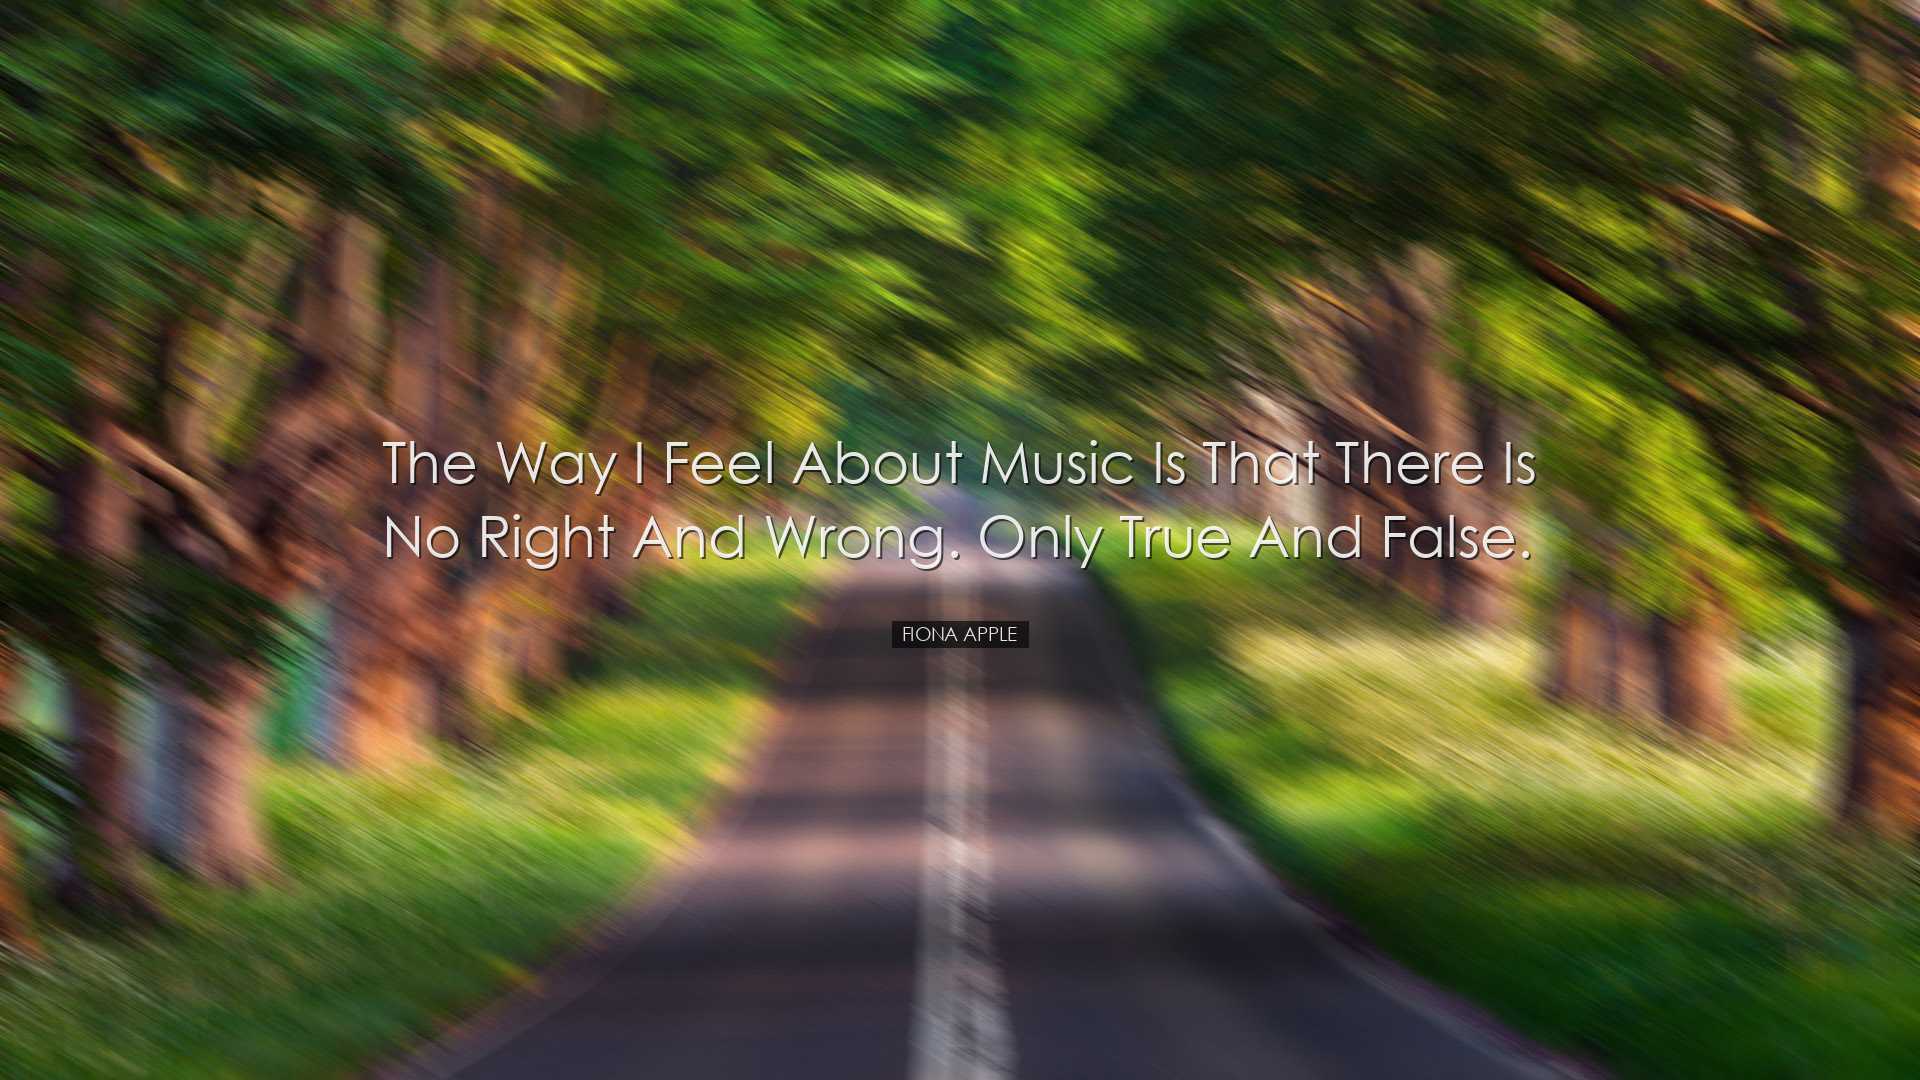 The way I feel about music is that there is no right and wrong. On